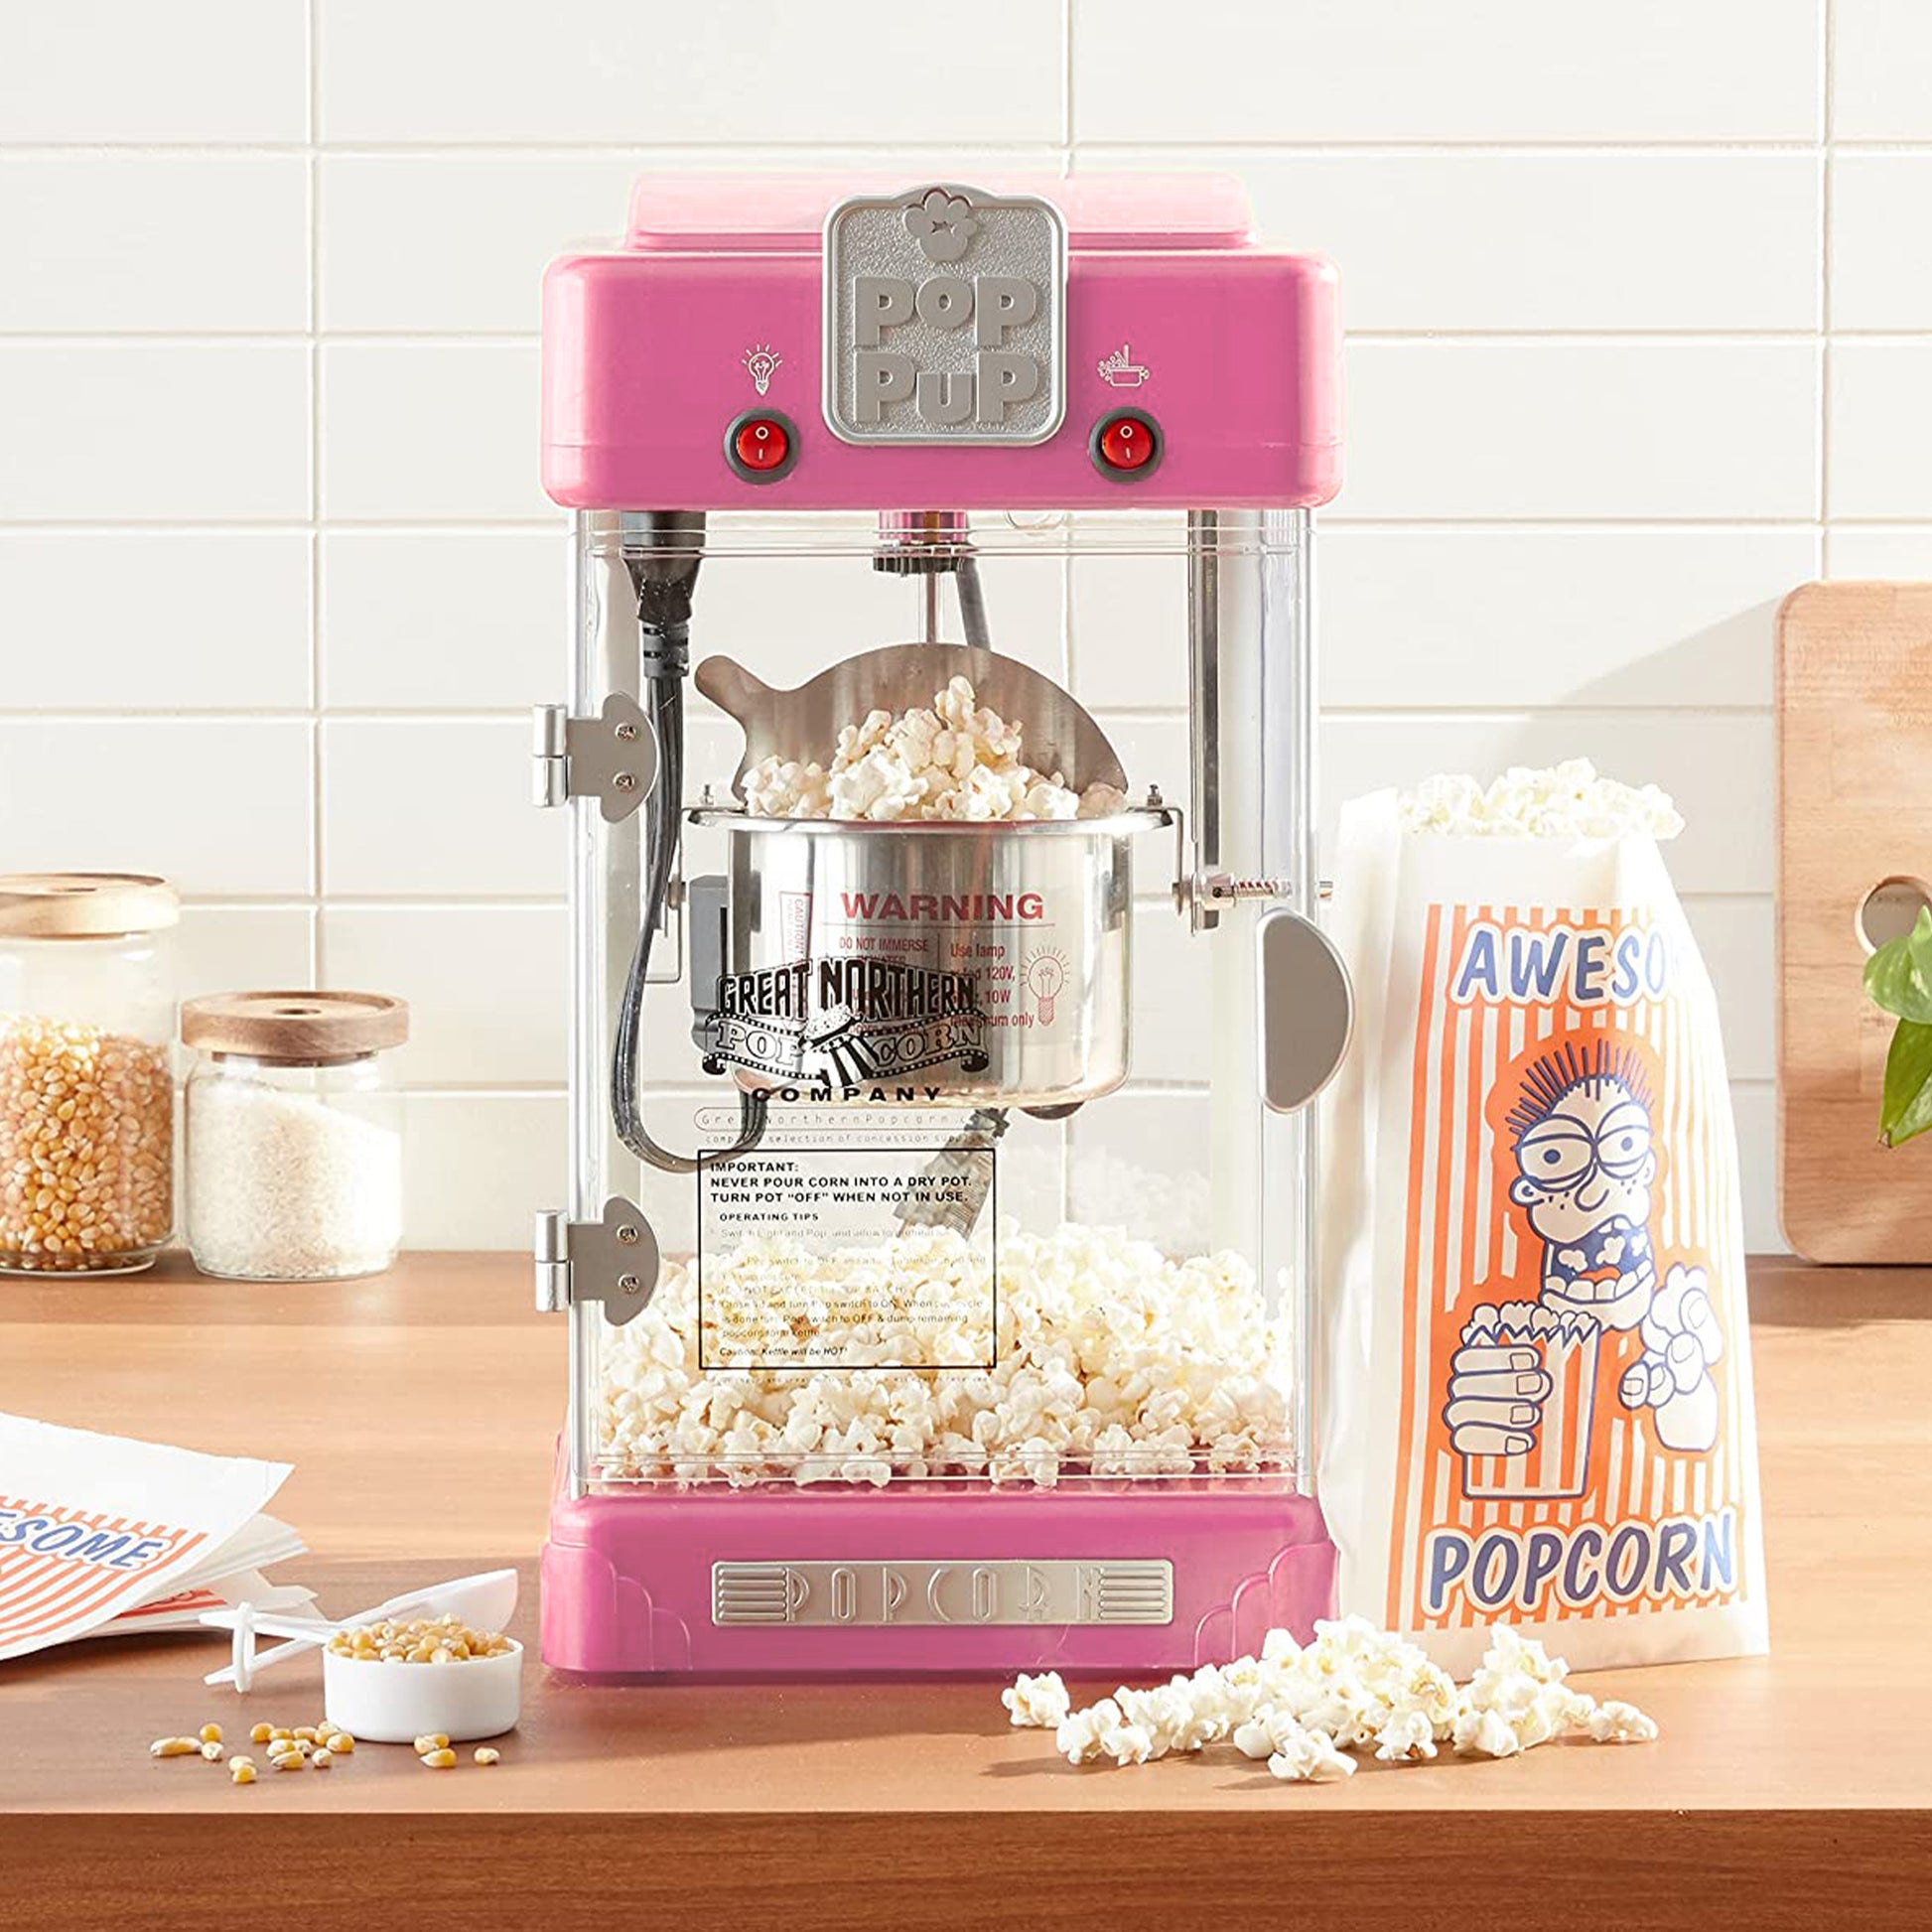 Great Northern Popcorn 2 Cups Oil Popcorn Machine, Red, Tabletop